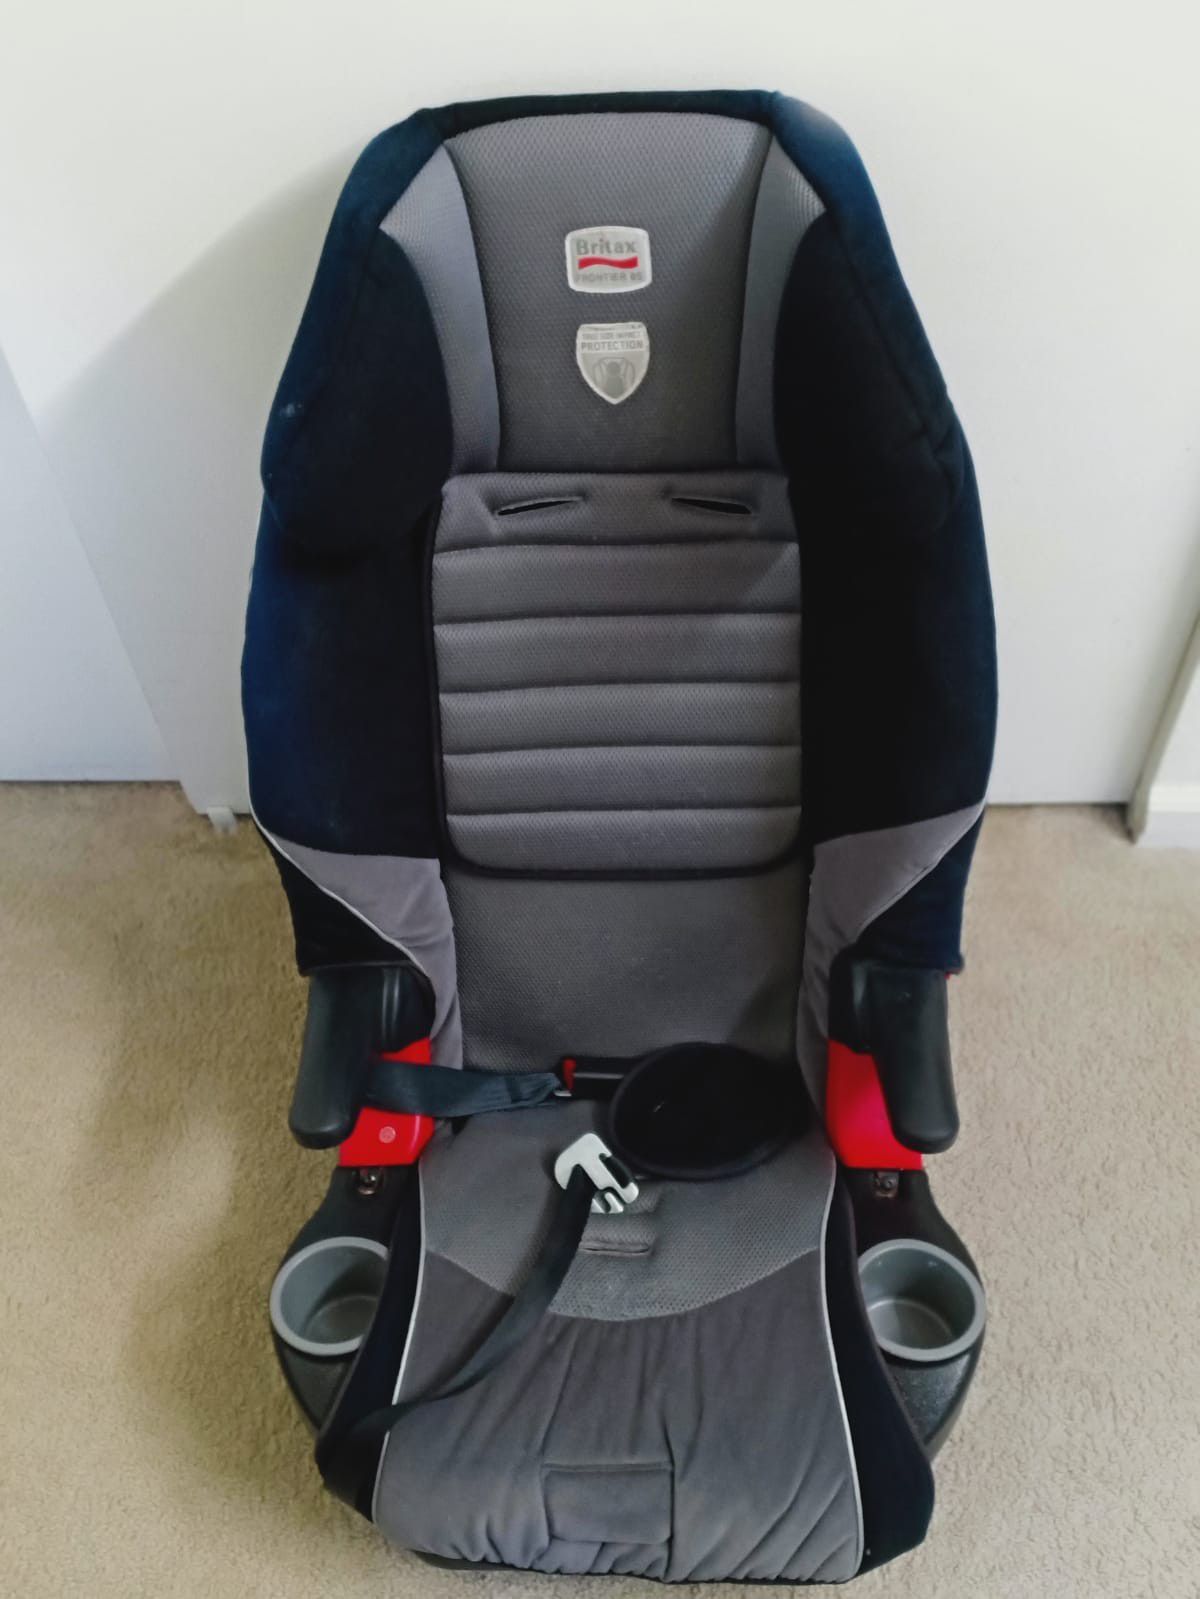 Britax frontier 85 combination booster car seat Rushmore